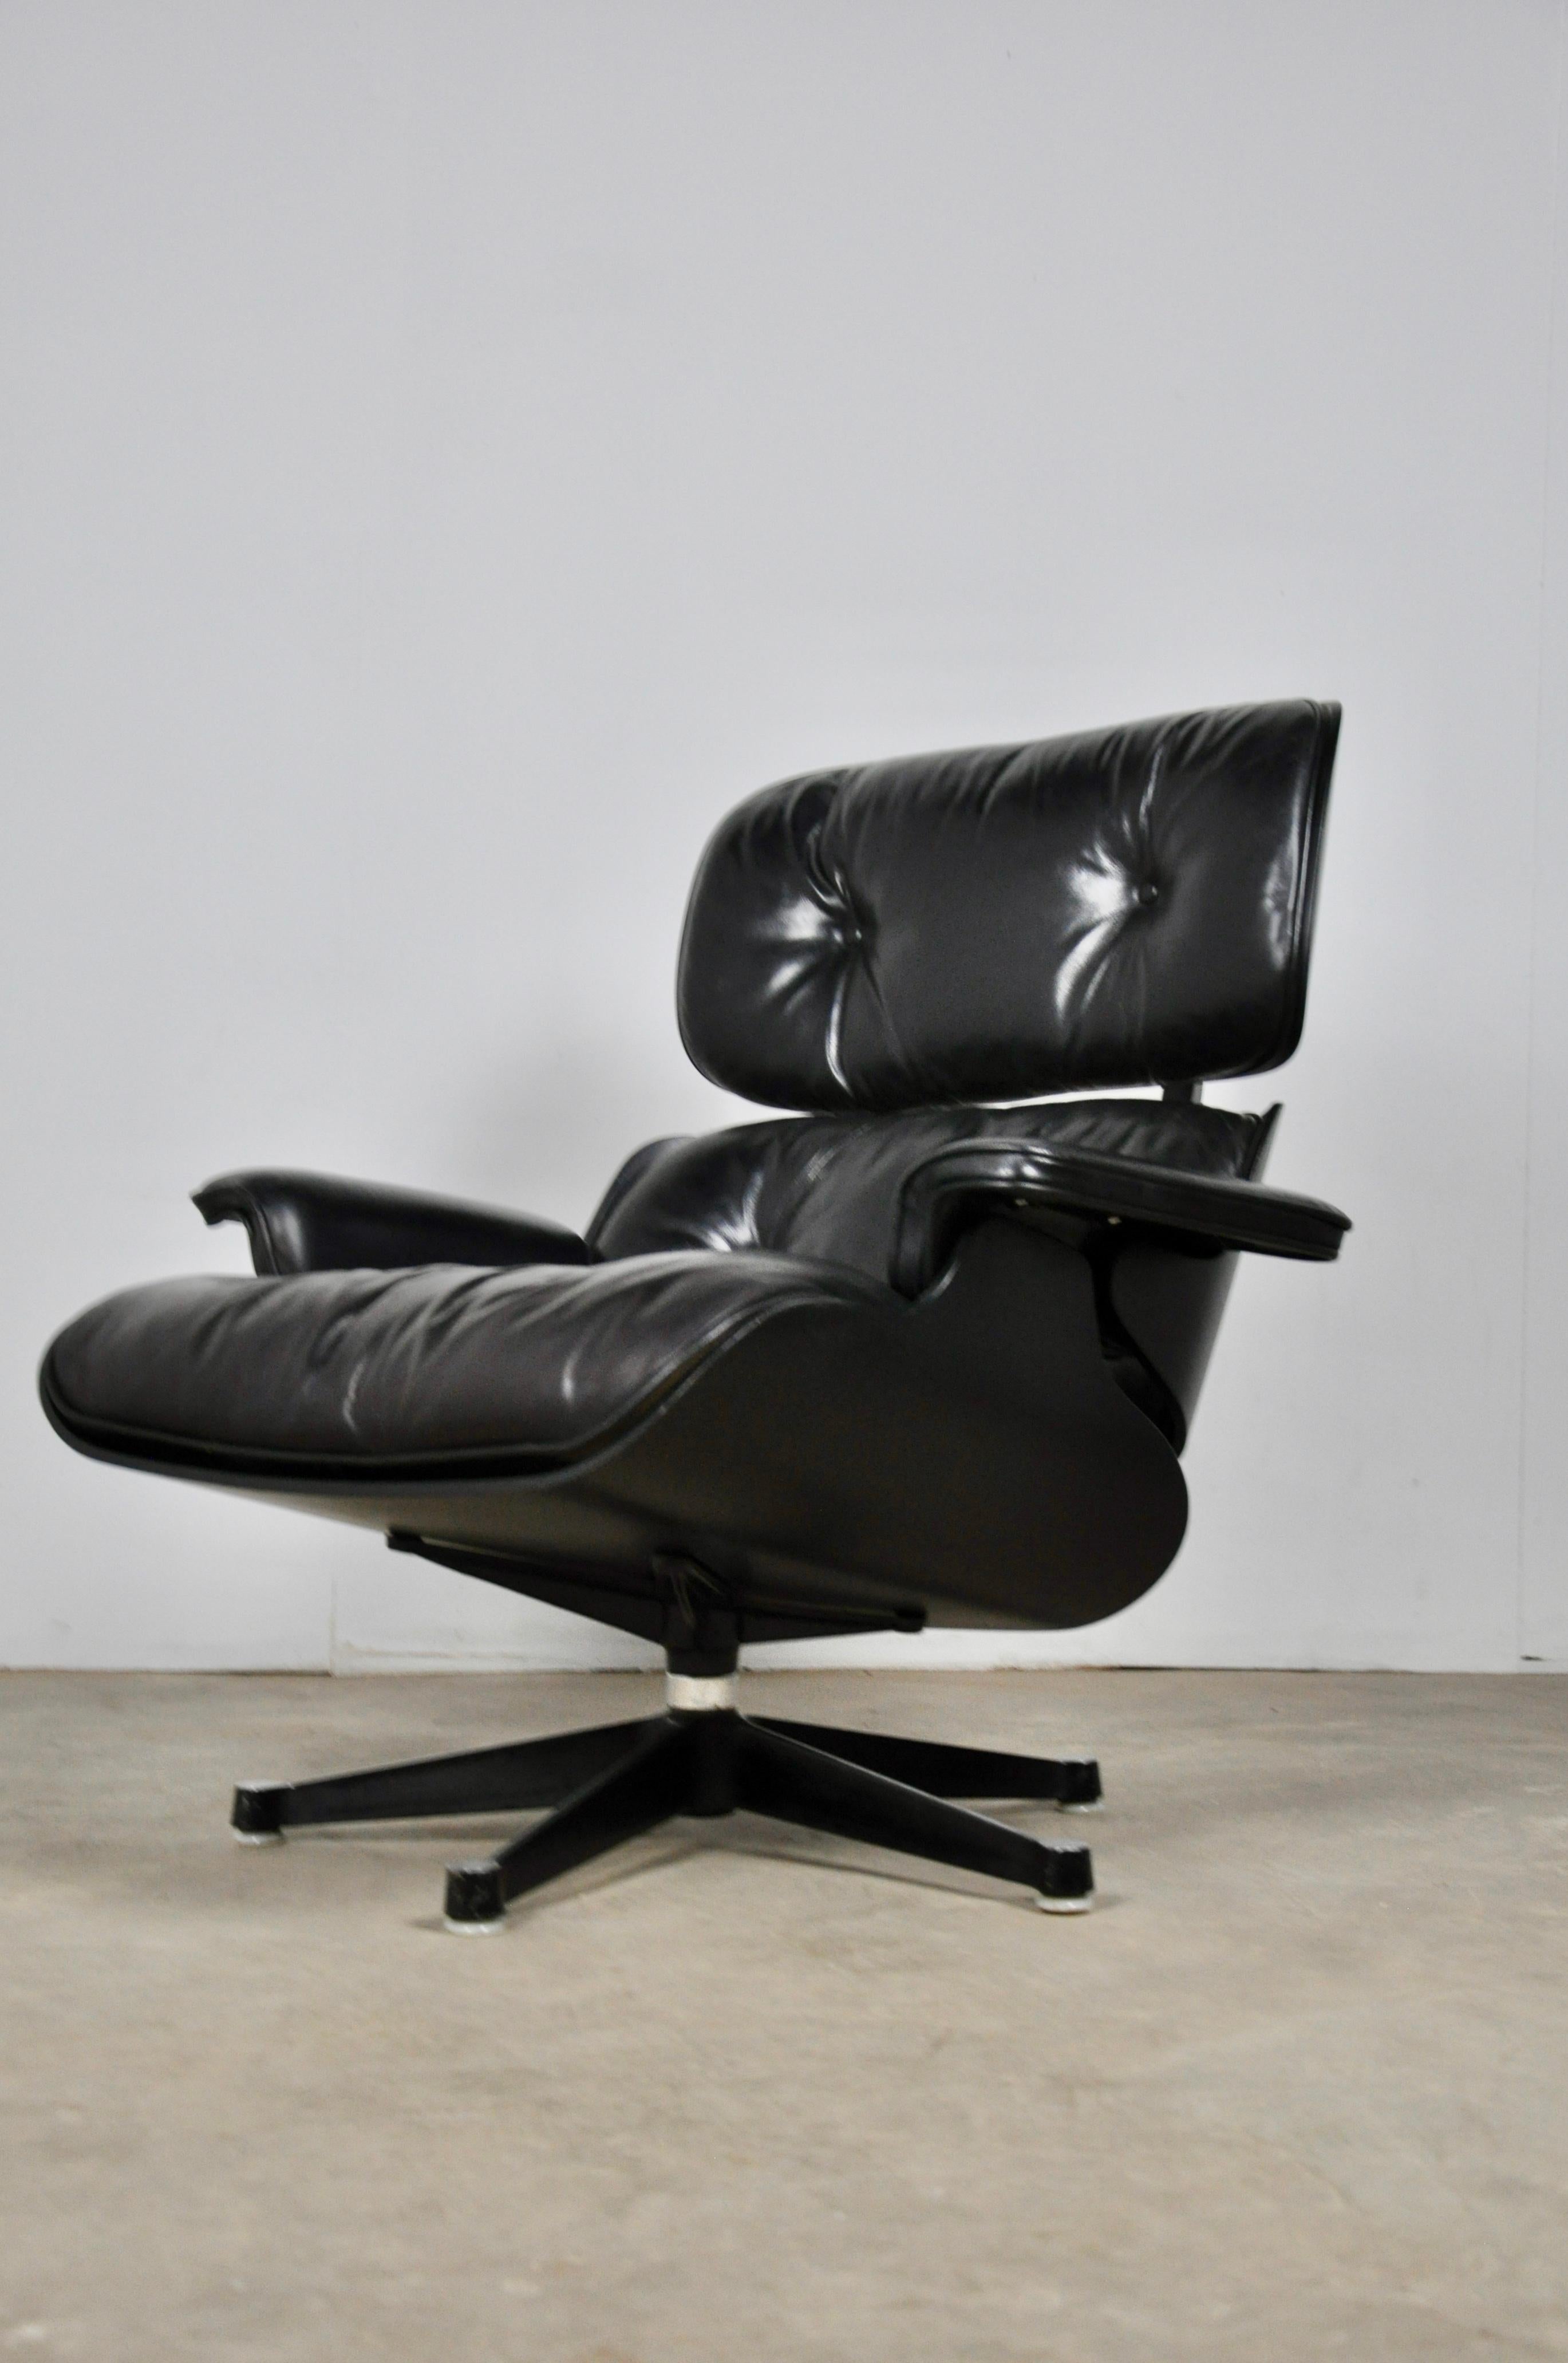 Black leather flesh lounge. Swivel foot. Small wear mark on the leather (see photo).